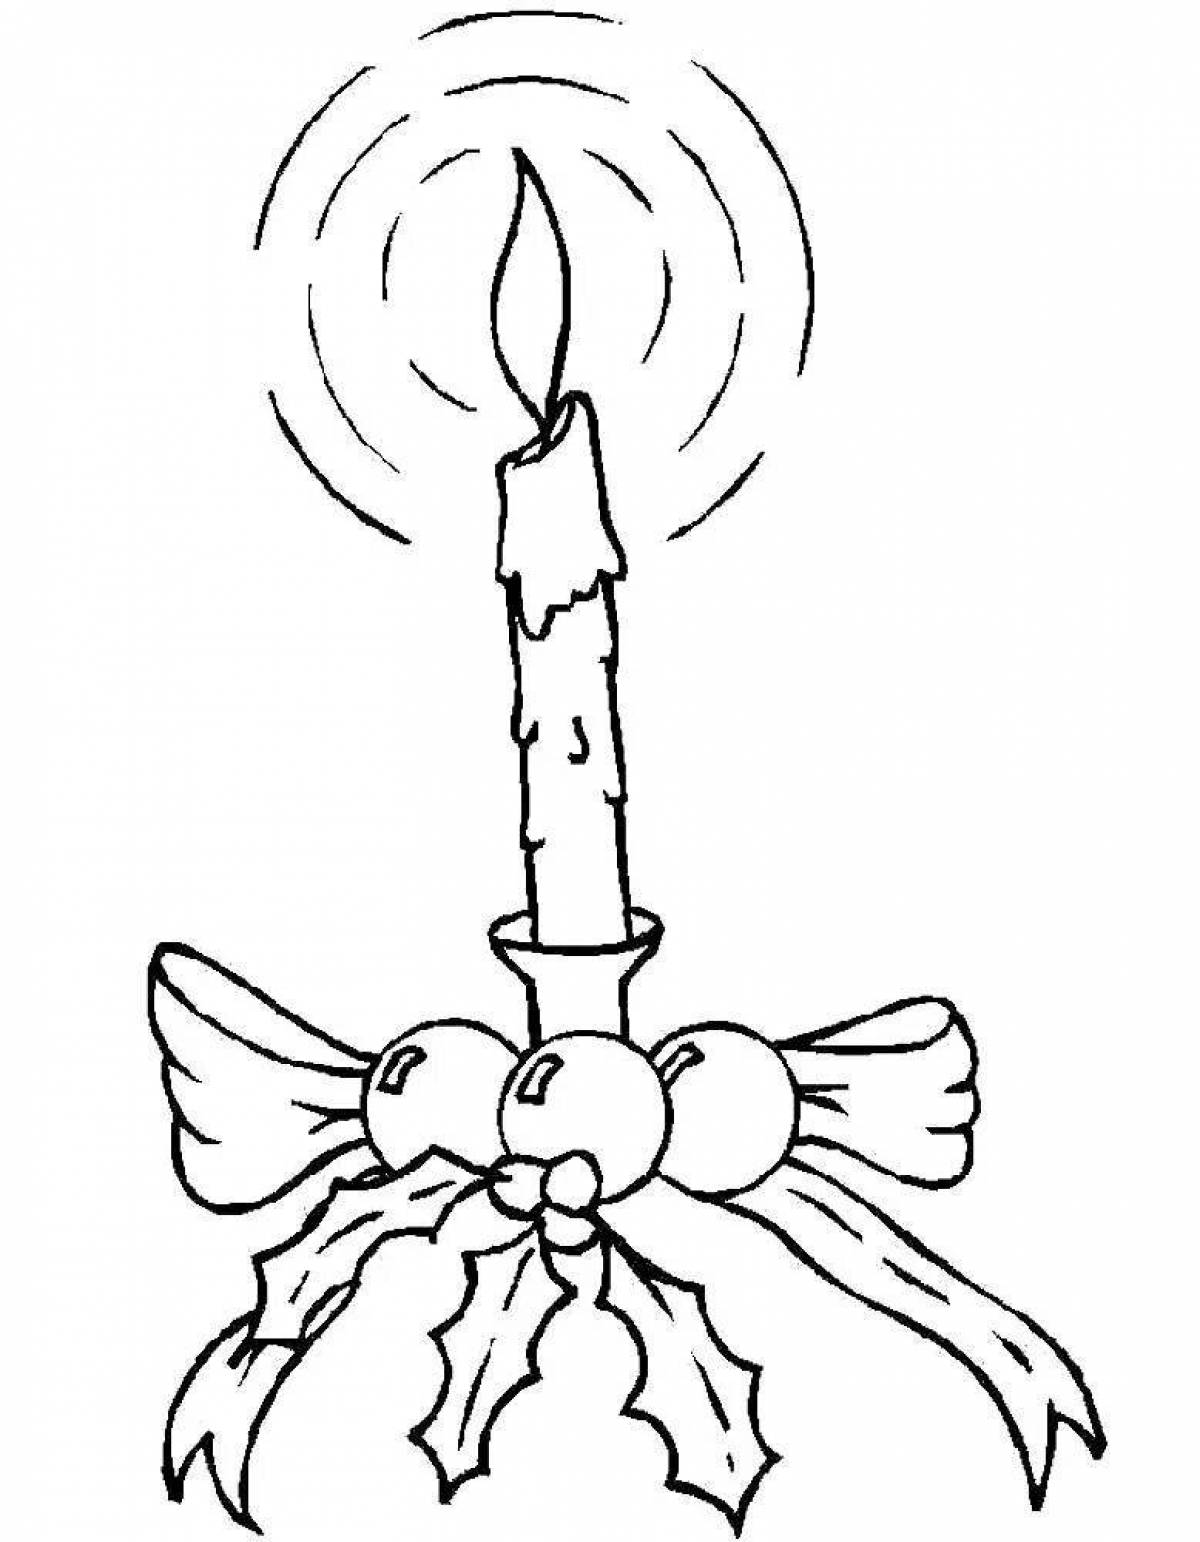 Adorable Christmas candle coloring page